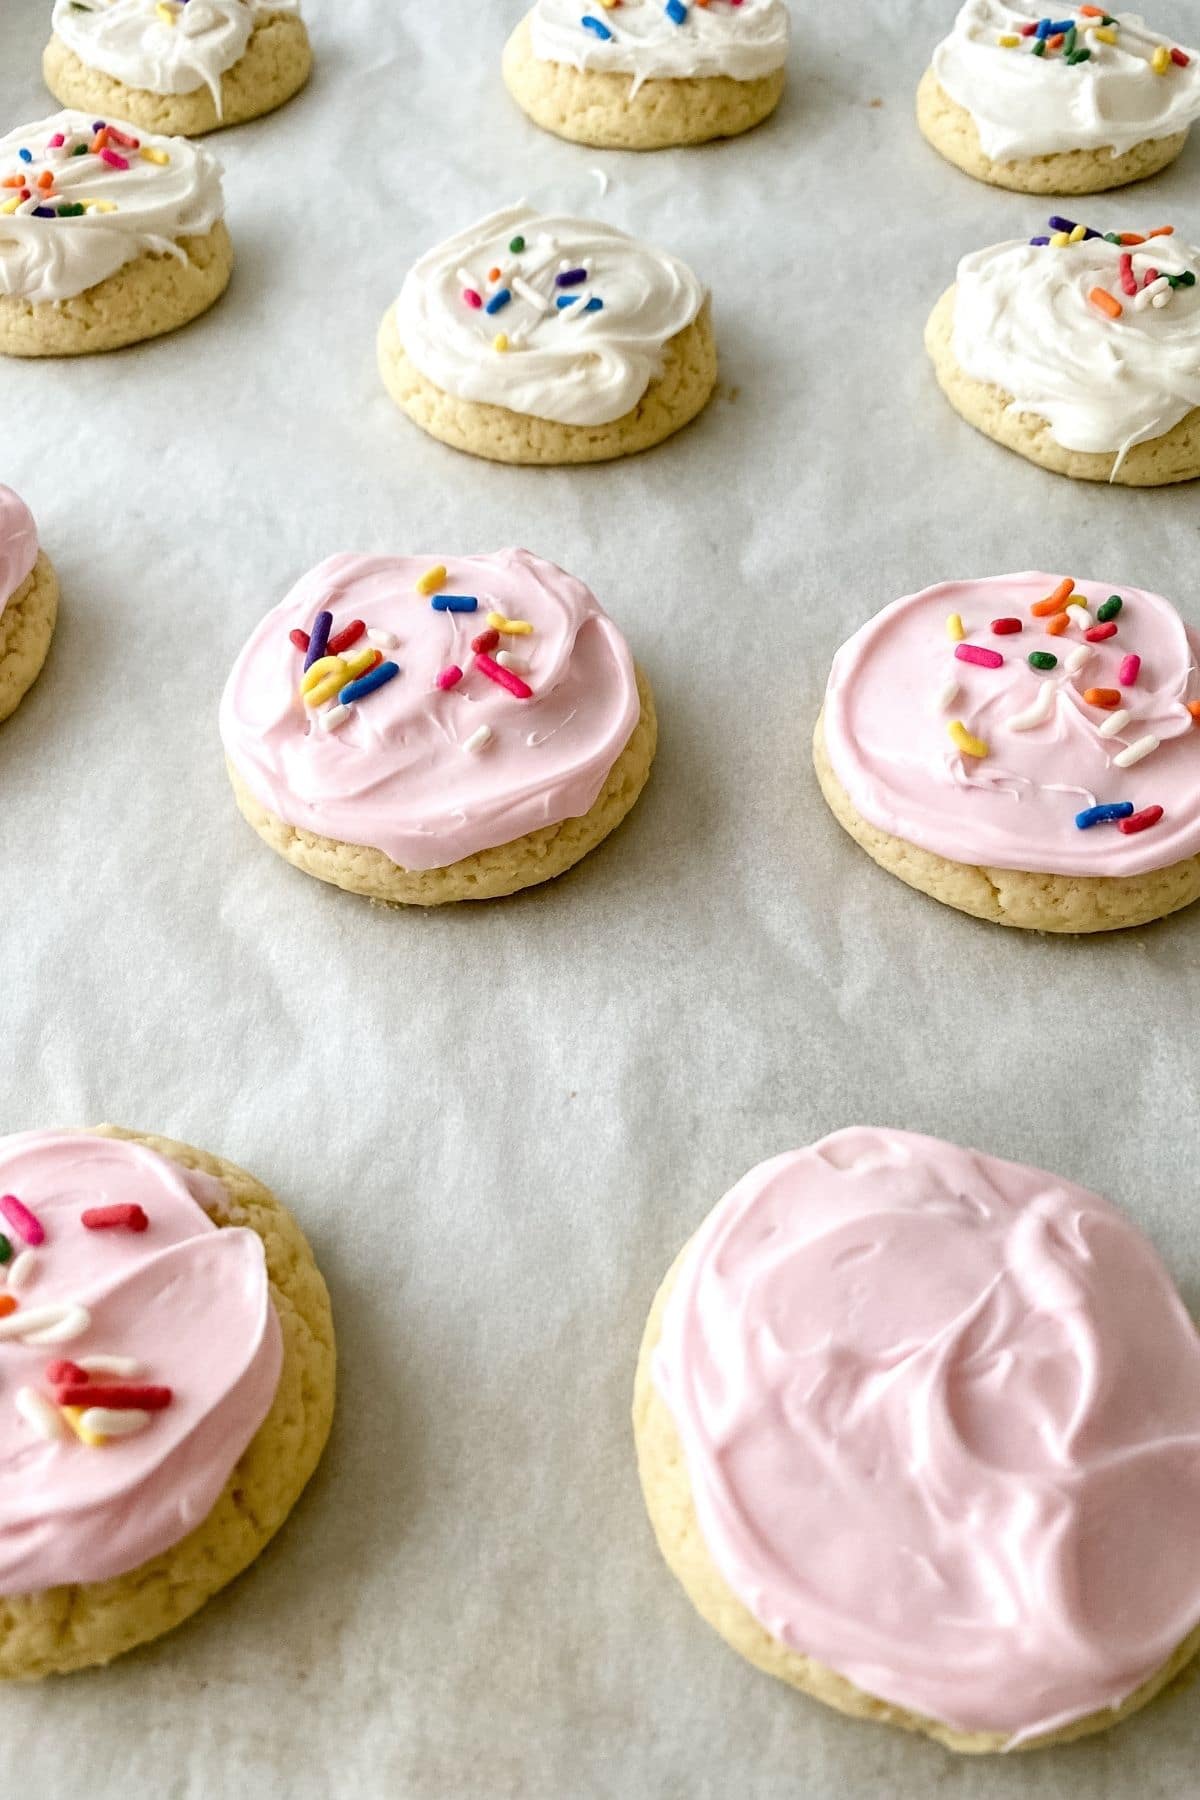 Light pink and white frosting on cookies laying on parchment paper